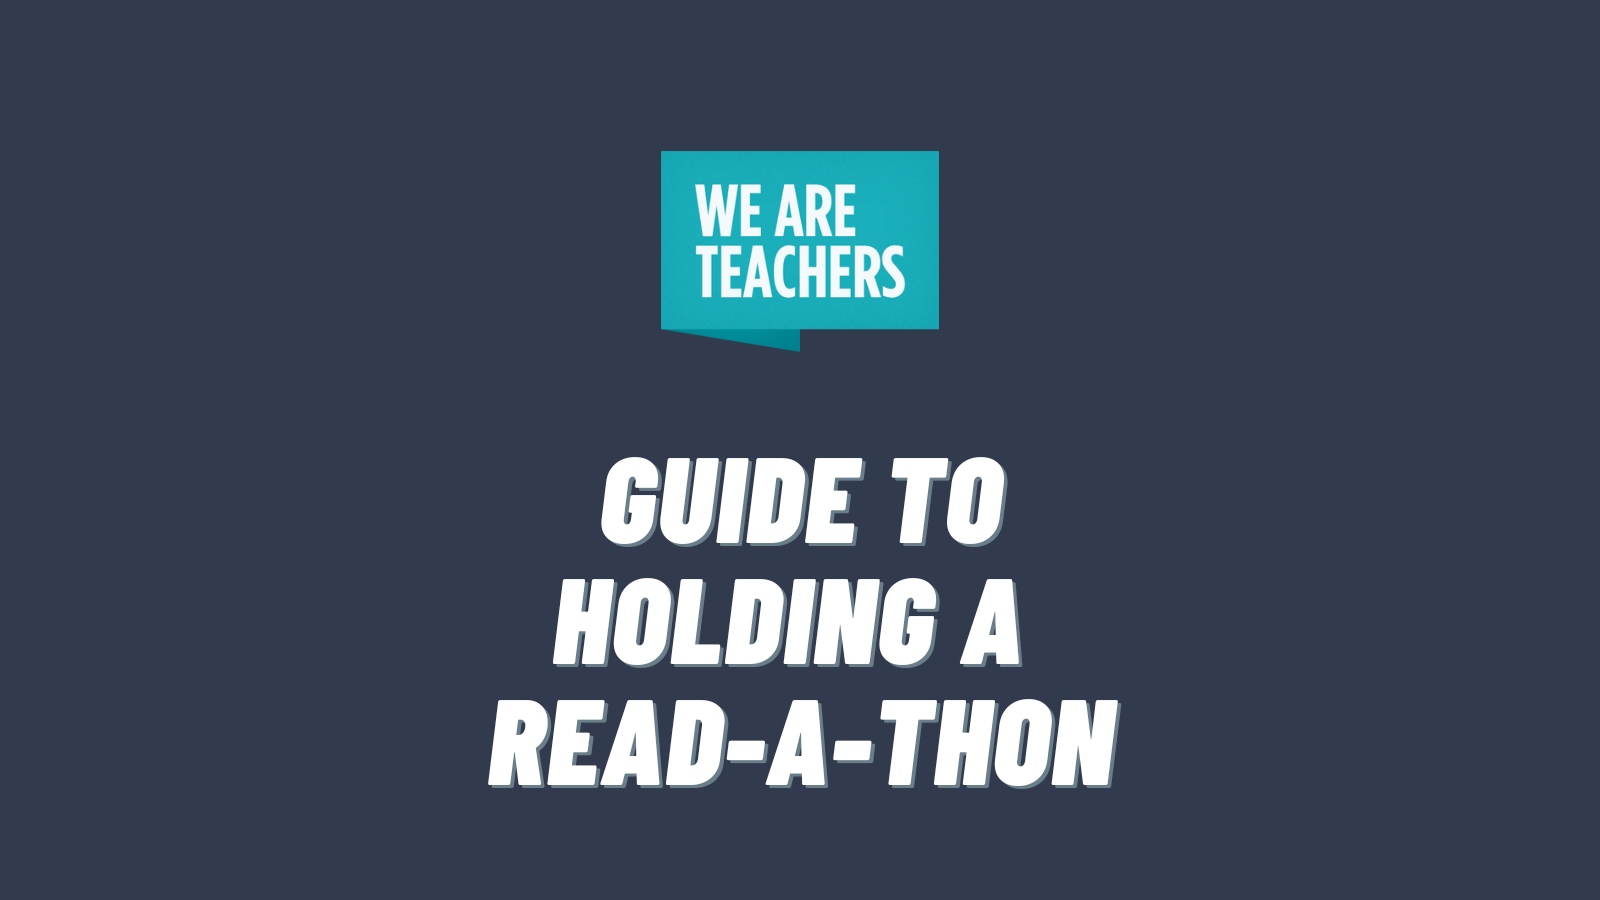 We Are Teachers logo and white text that says Guide to Holding a Read-a-Thon on dark gray background.